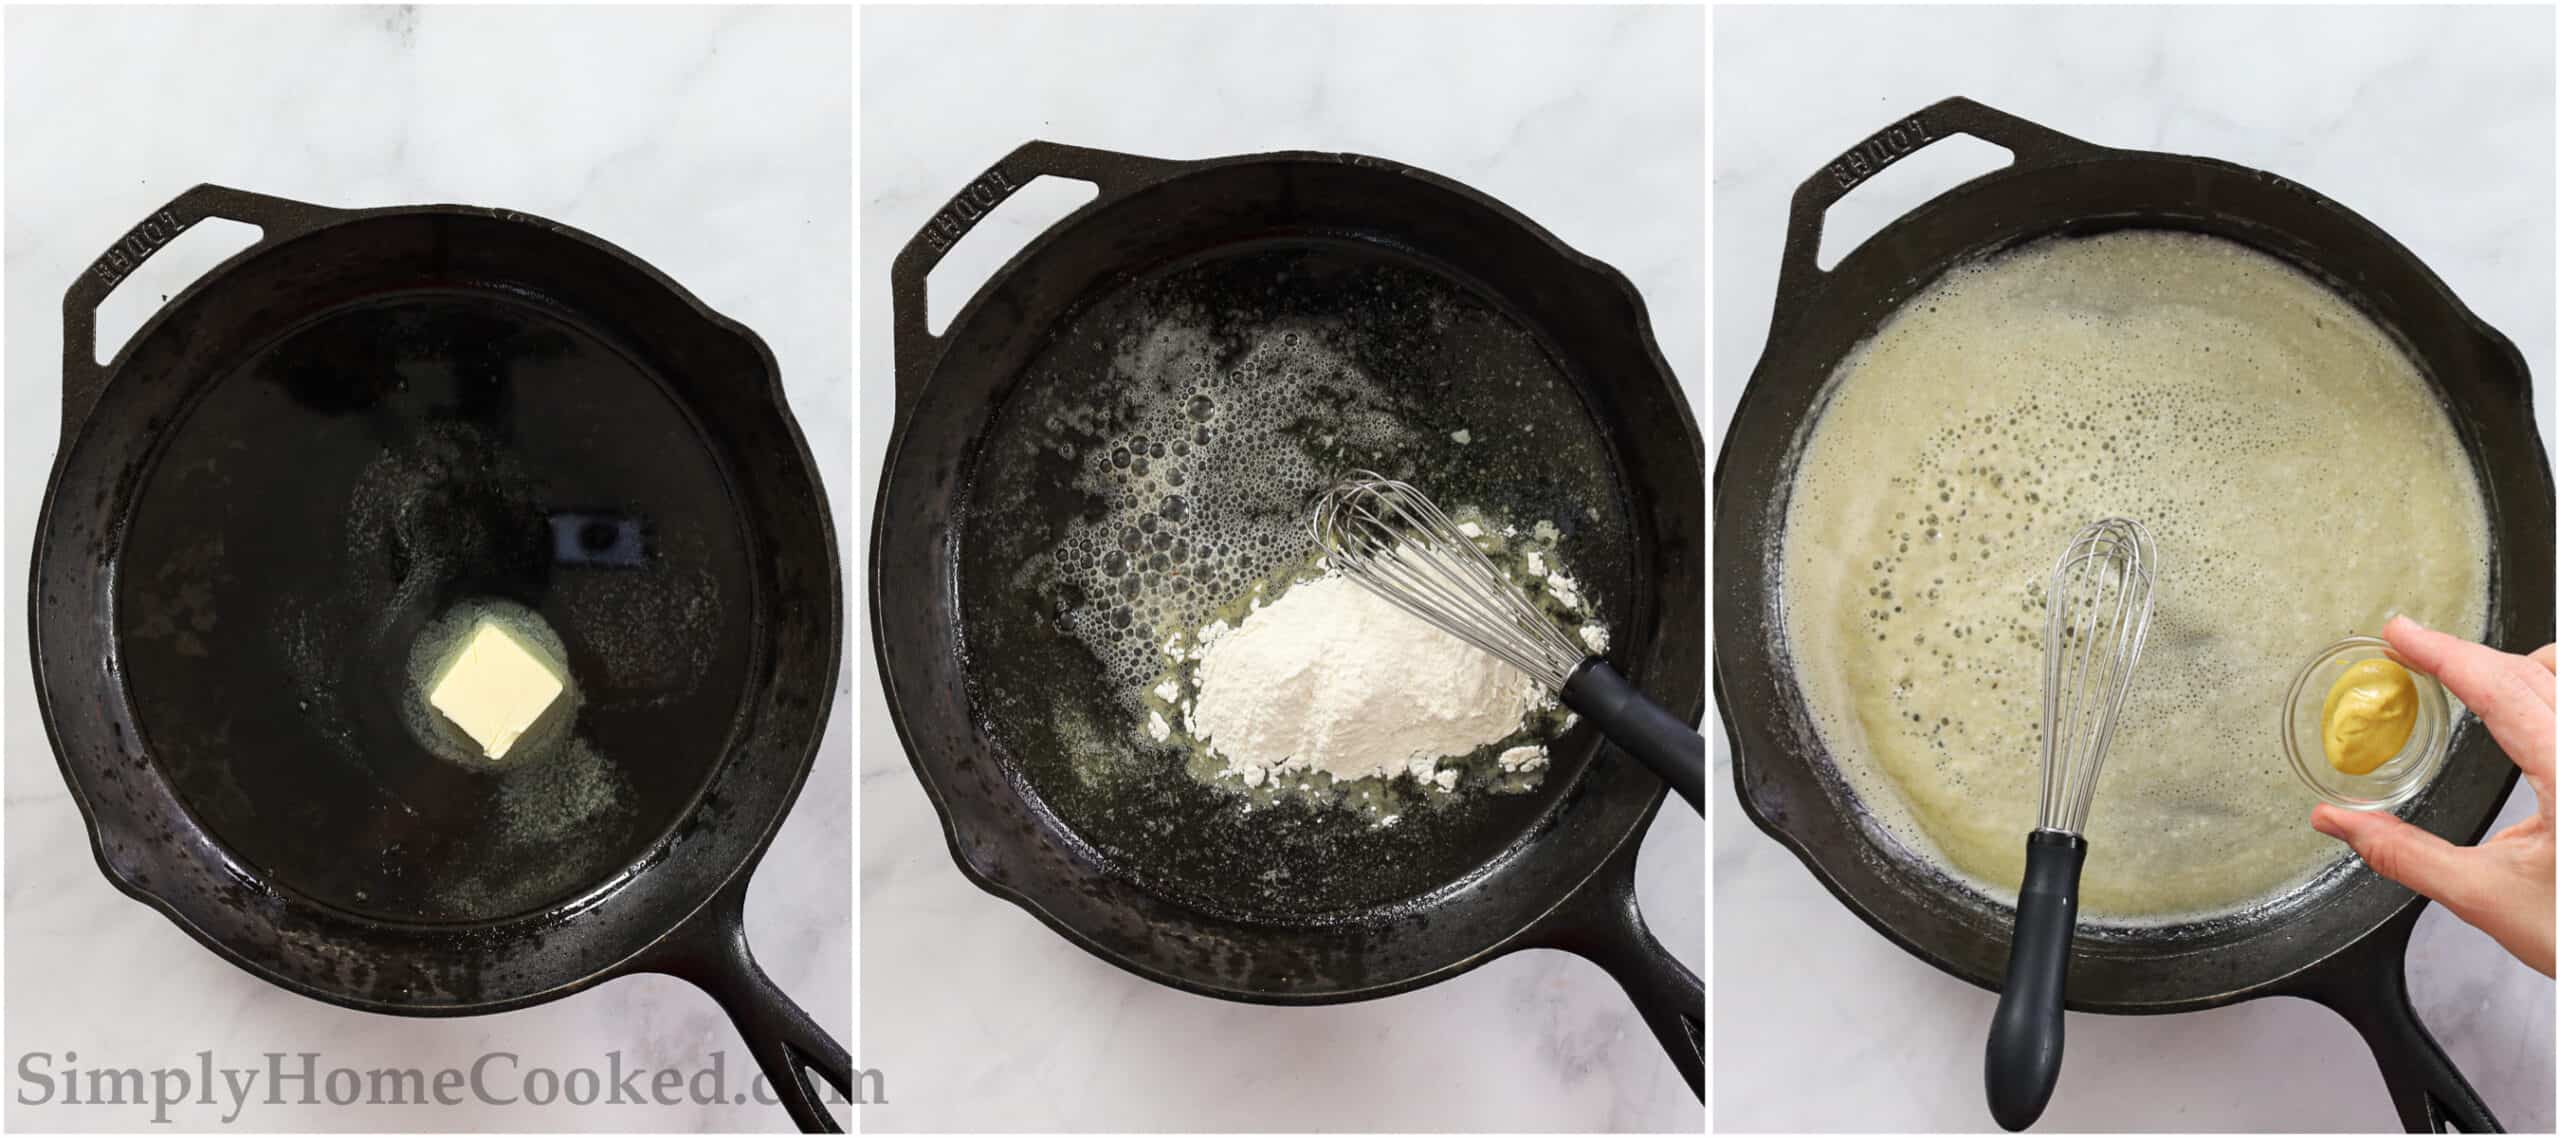 Steps for making Perfect Swedish Meatballs, including melting butter and oil in a cast-iron skillet, then whisking in flour to make a roux for the sauce. 